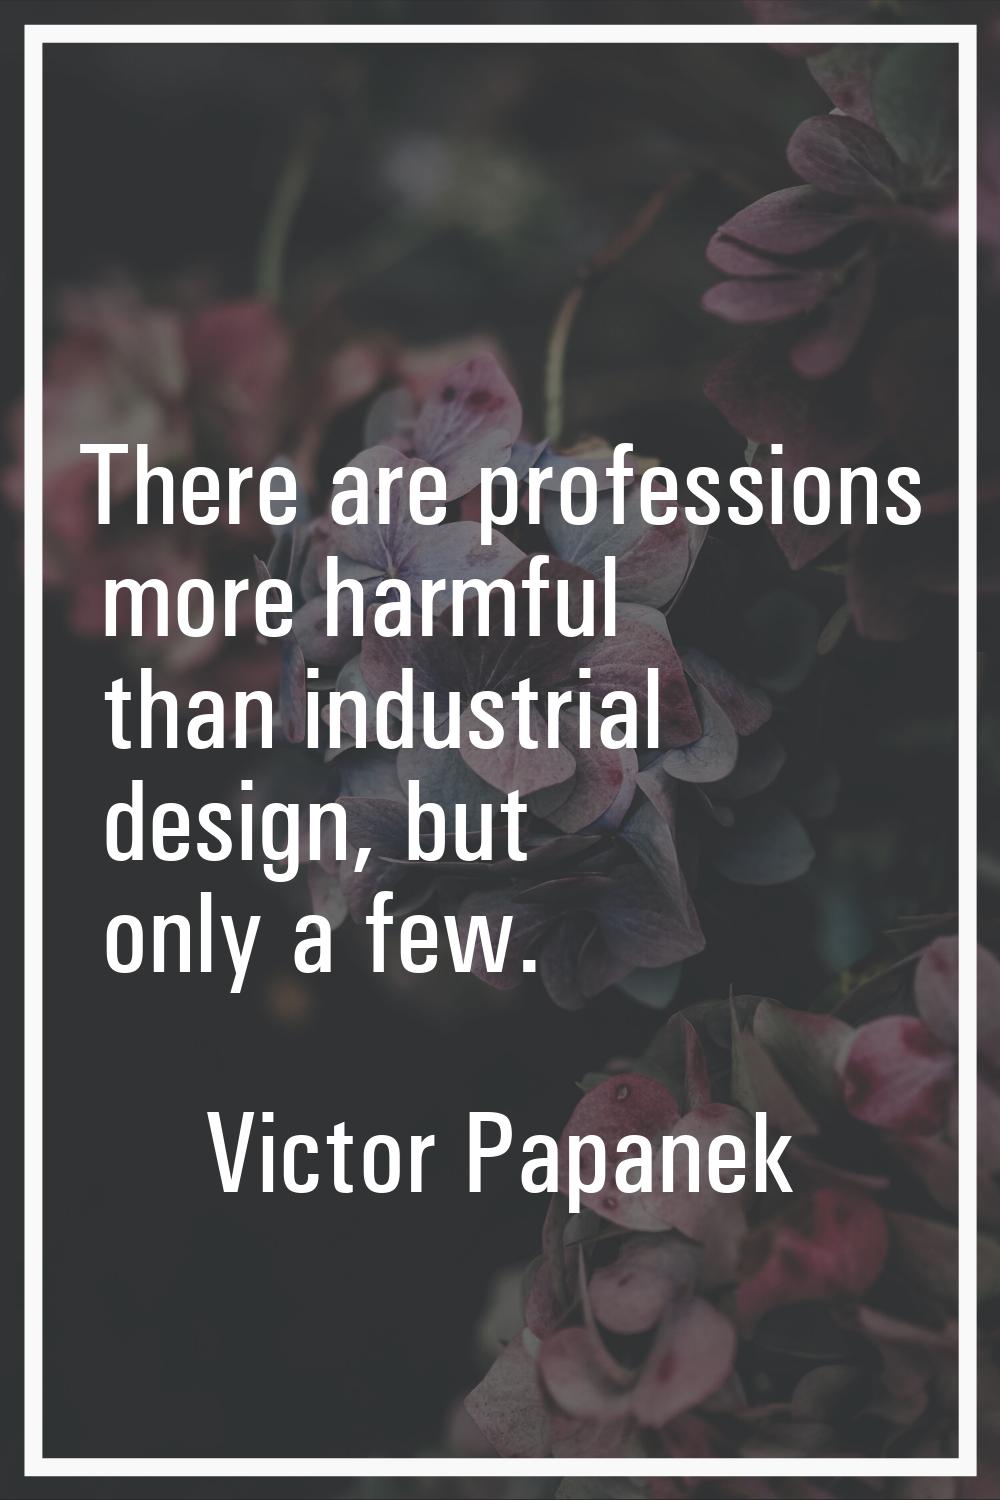 There are professions more harmful than industrial design, but only a few.